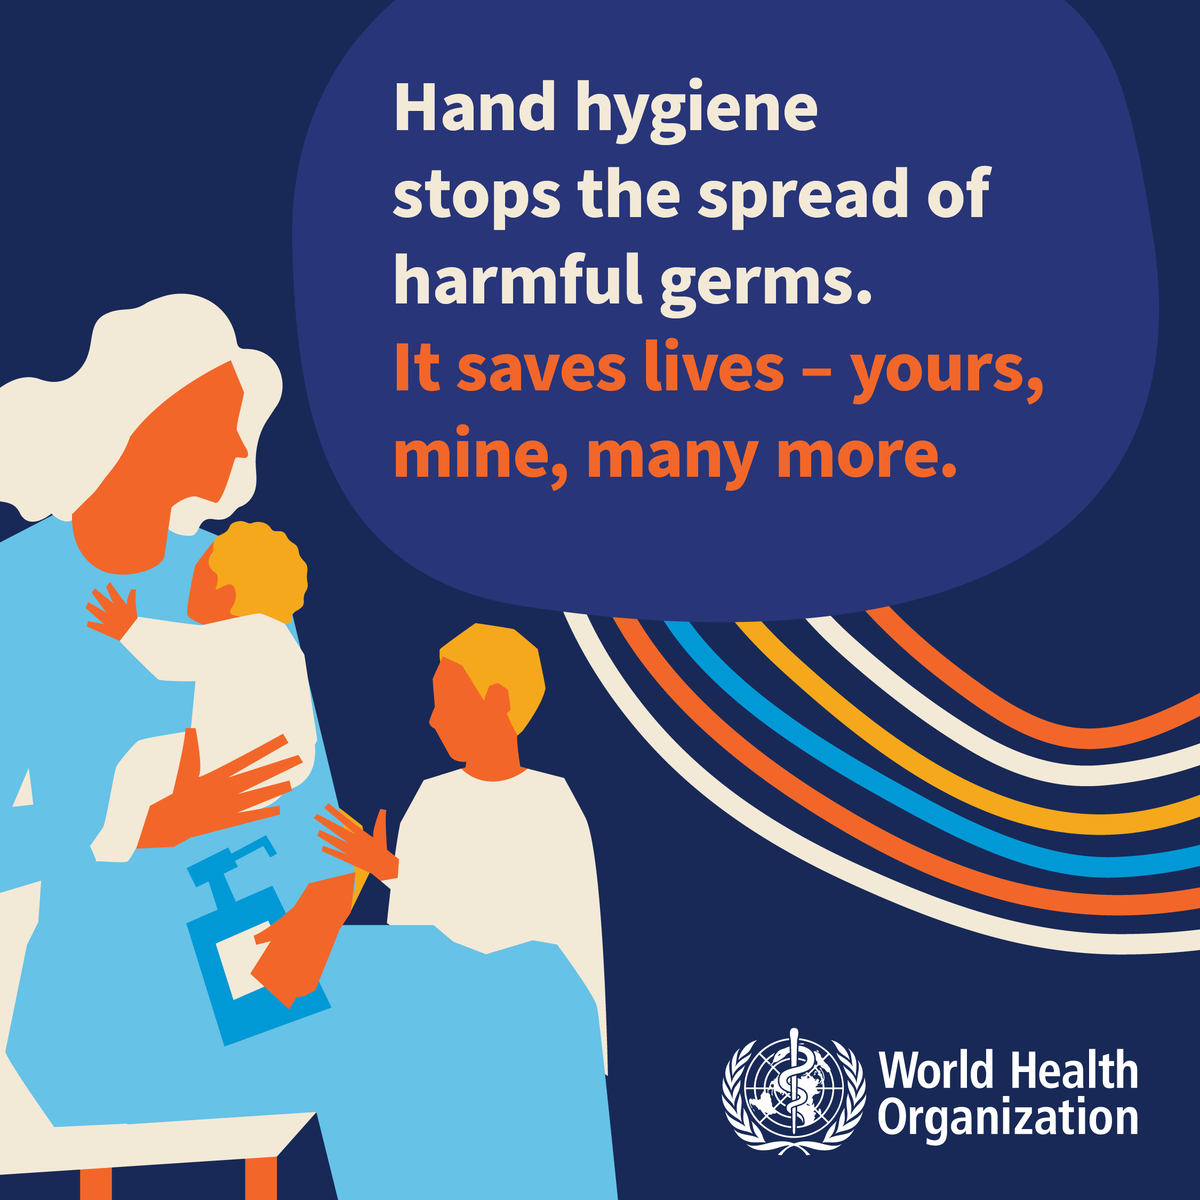 Today is #WorldHandHygieneDay. It’s important to remember that practicing good #handhygiene stops the spread of harmful germs and saves lives. ow.ly/majc50Rvzv9